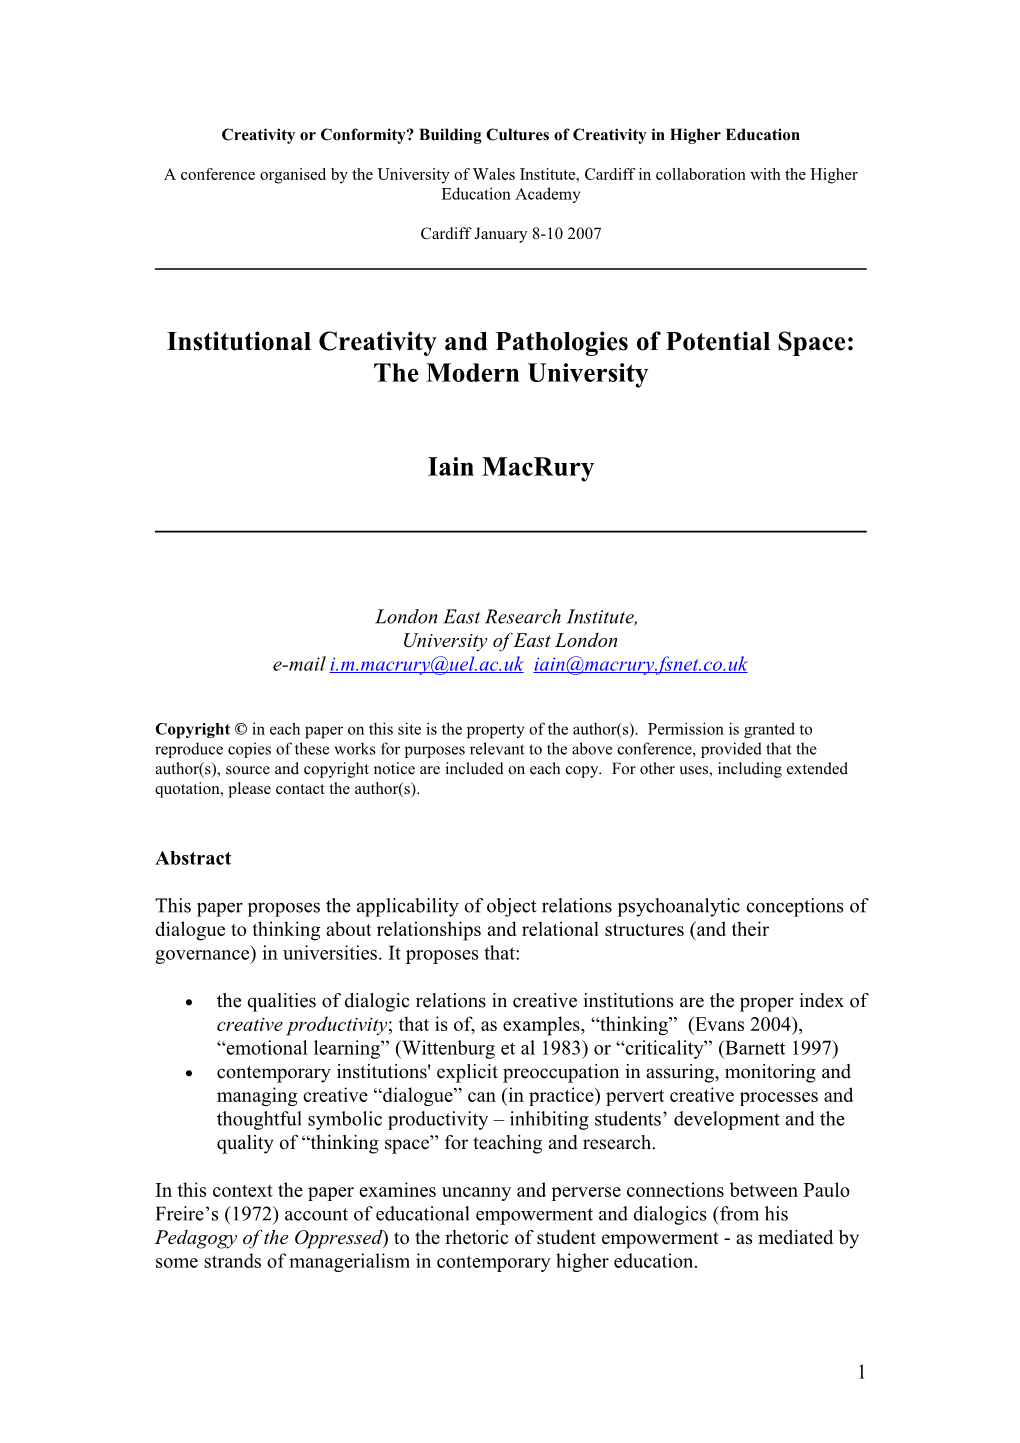 Institutional Creativity and the Pathologies of Potential Space